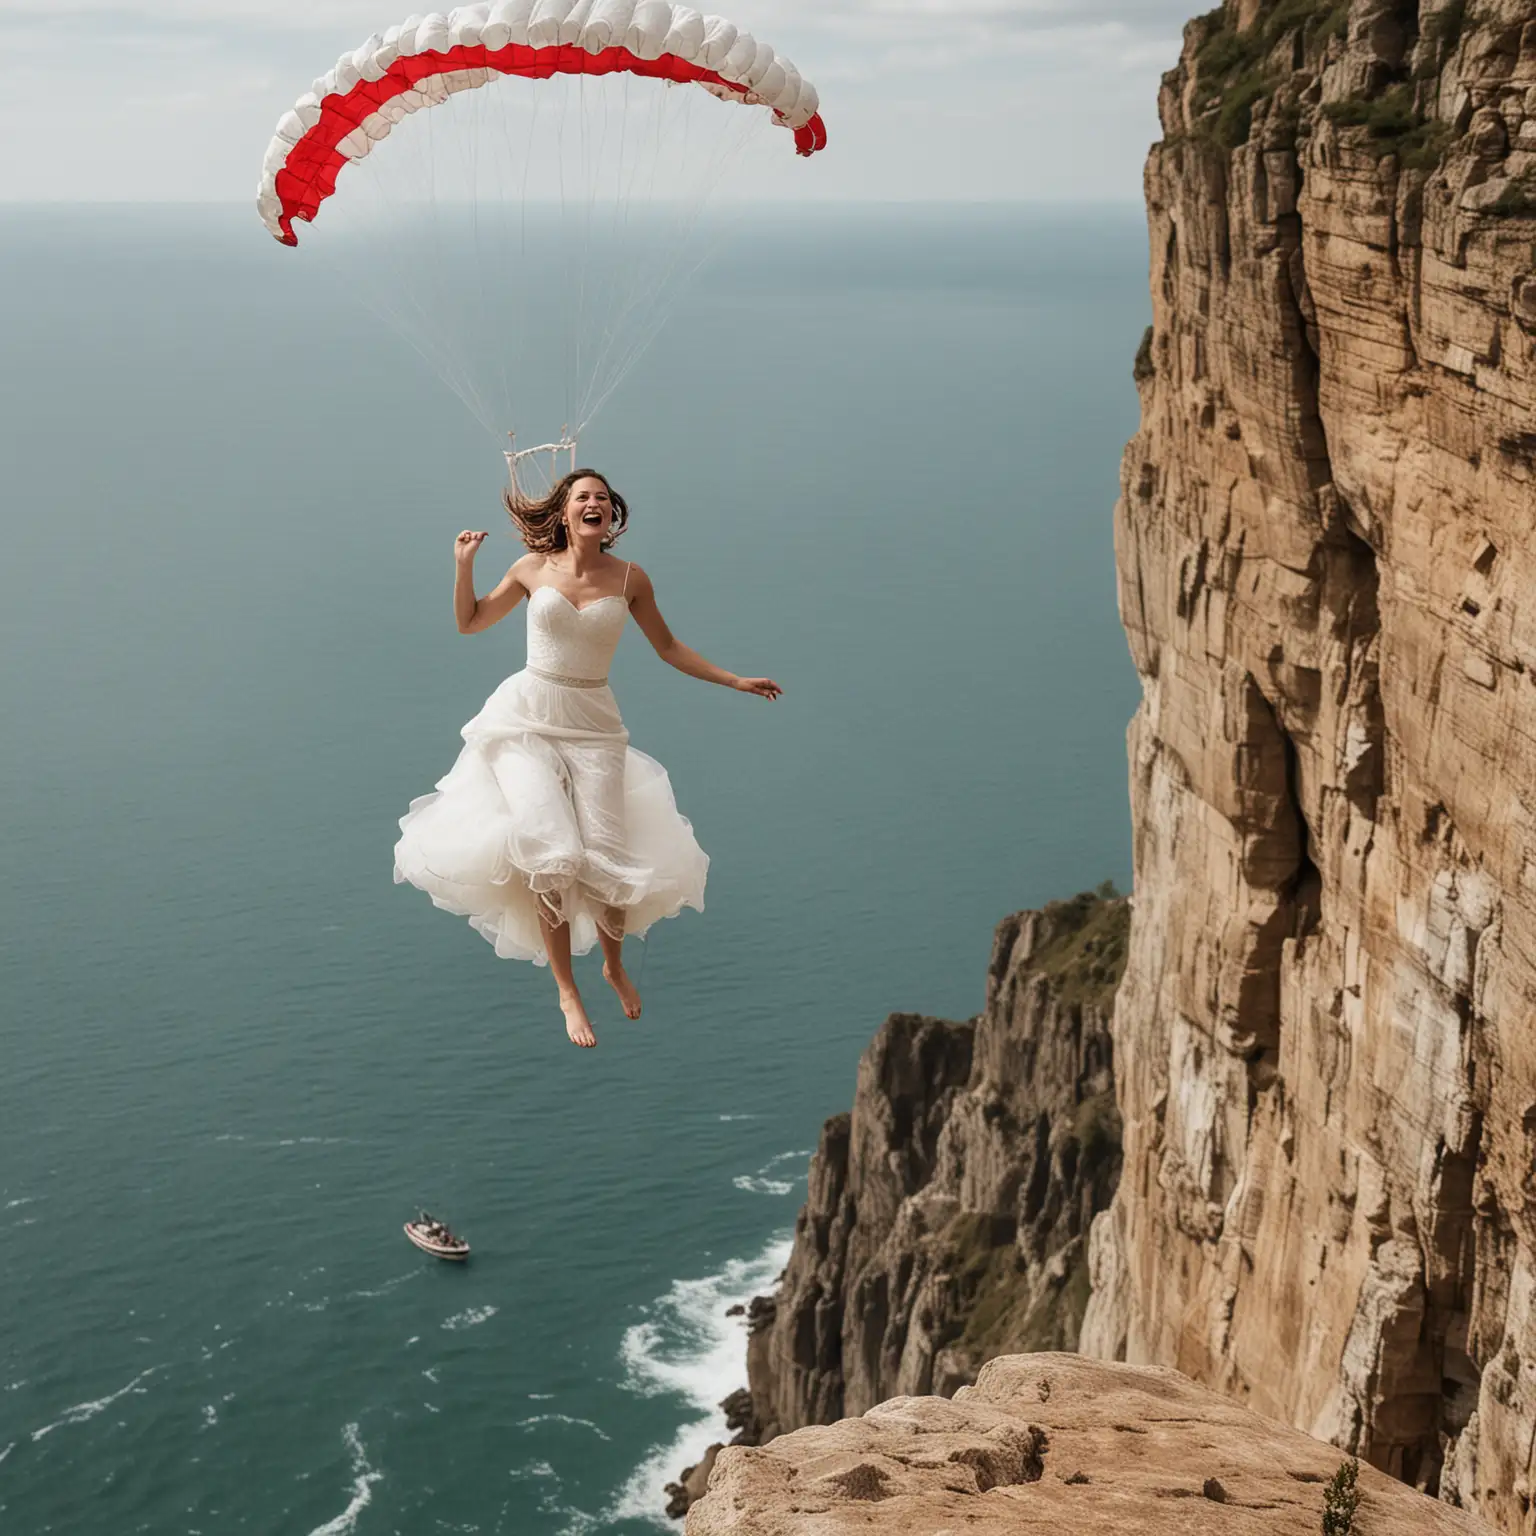 A bride jumping off a cliff with a parachute